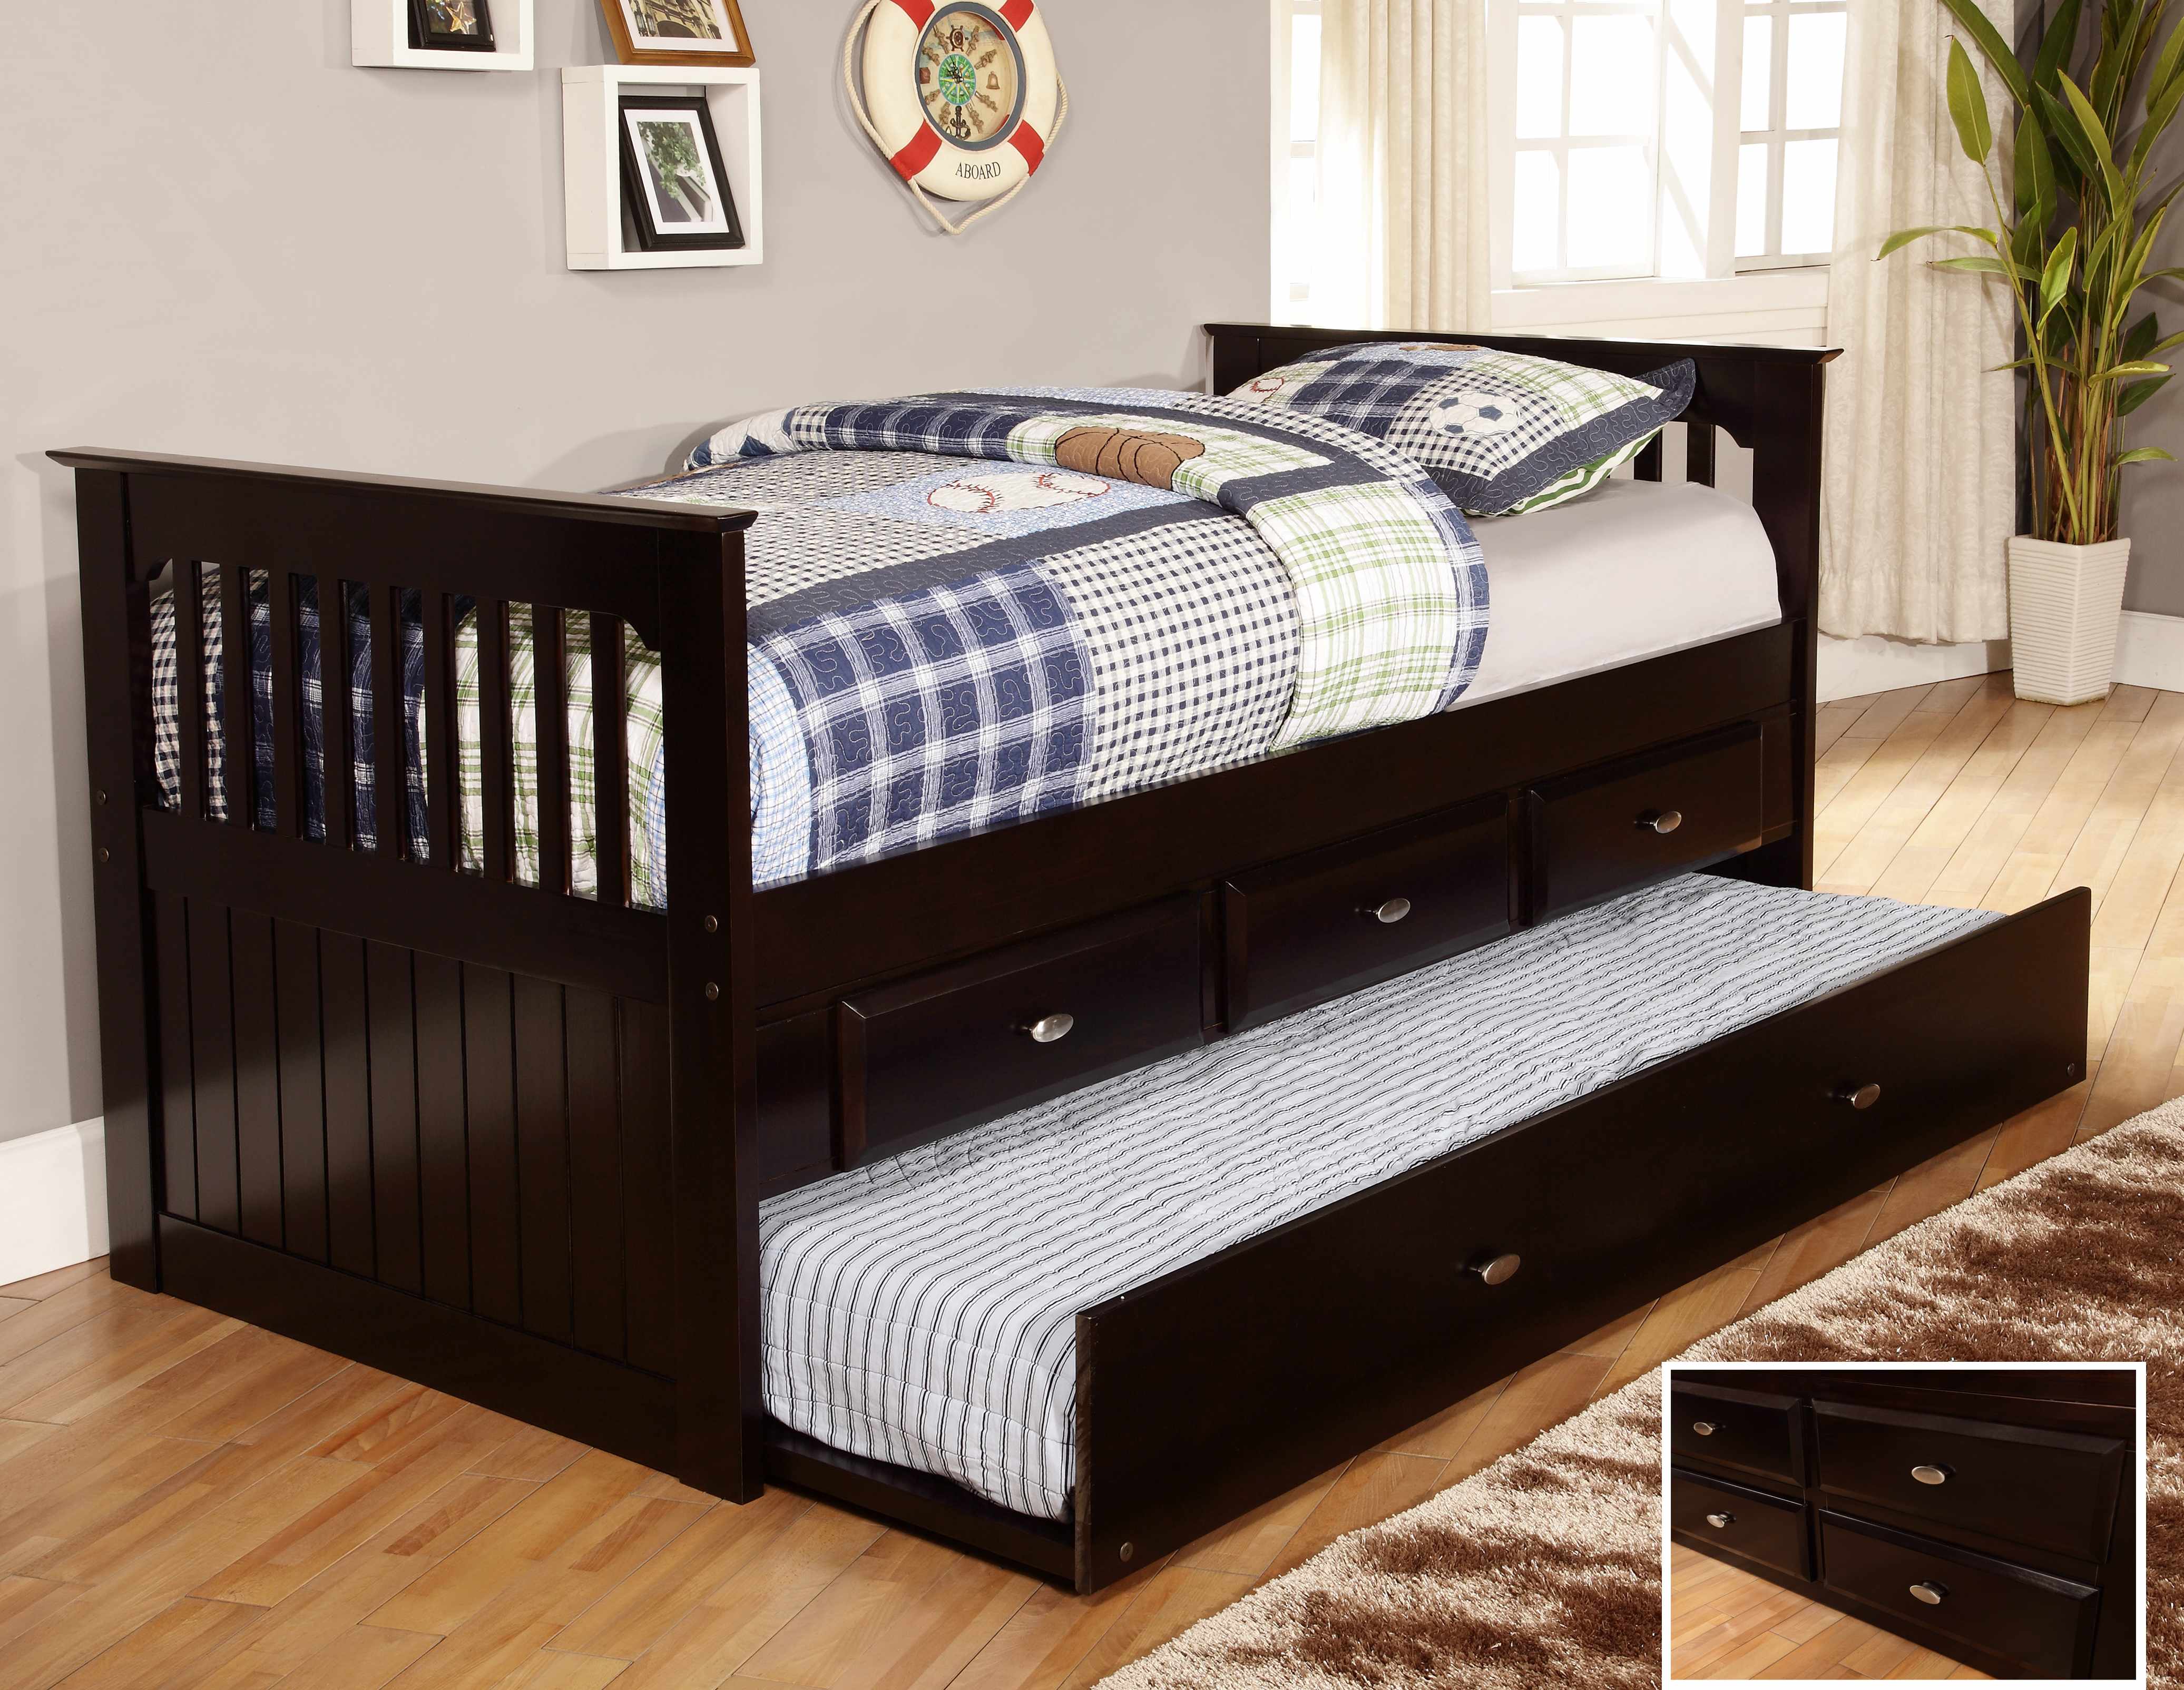 Day bed sale uk